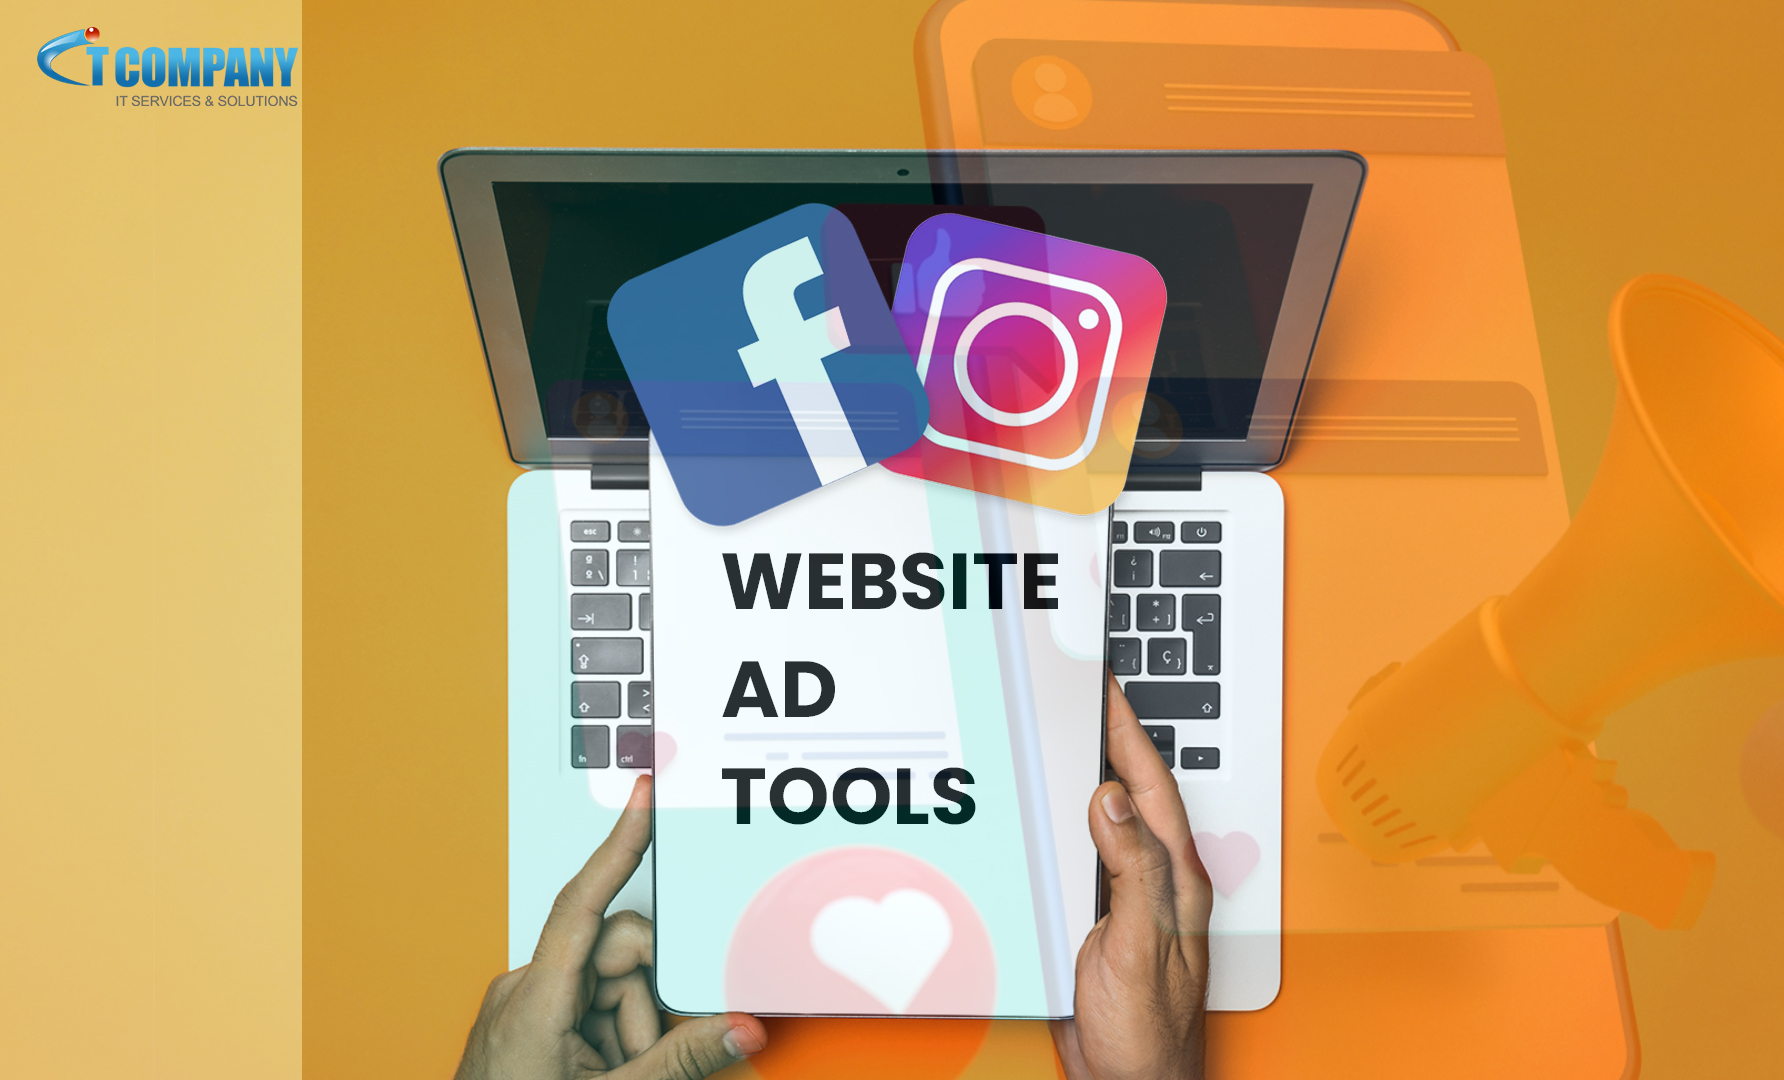 Ad tool: The website platform can compete with Facebook ads